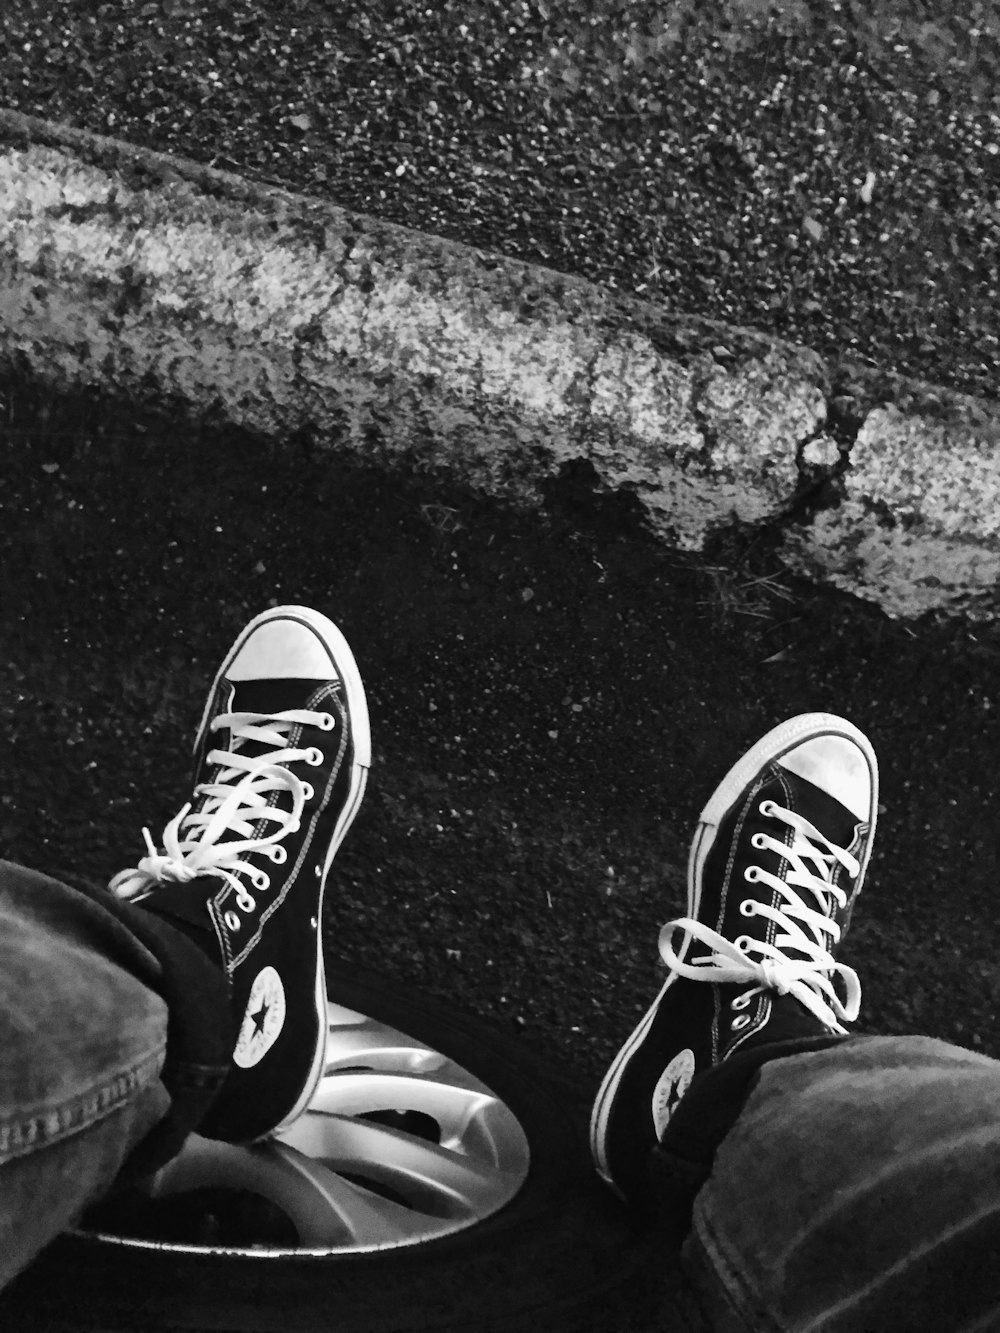 person wearing black and white converse all star high top sneakers